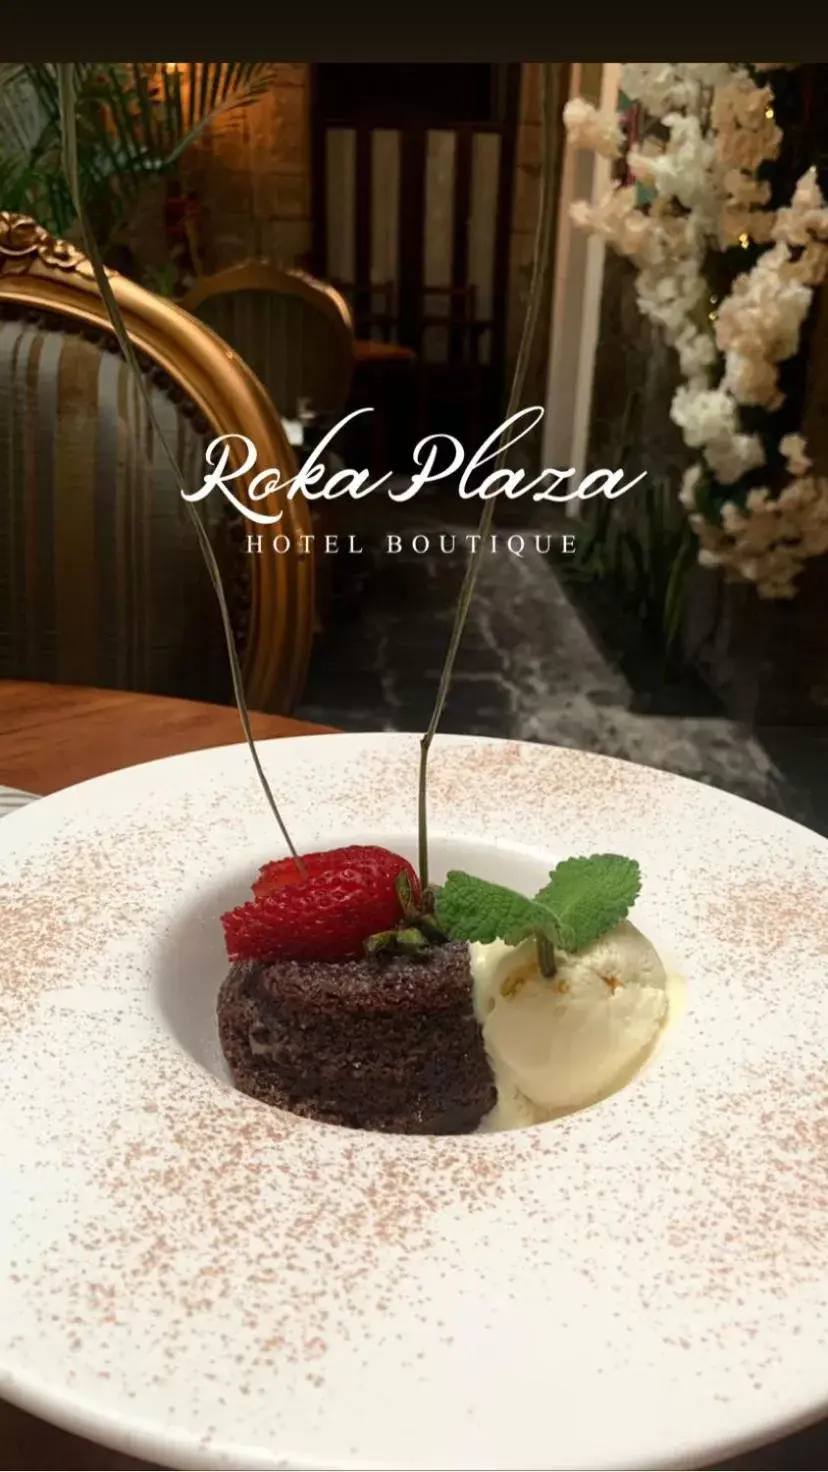 Food and drinks in Roka Plaza Hotel Boutique